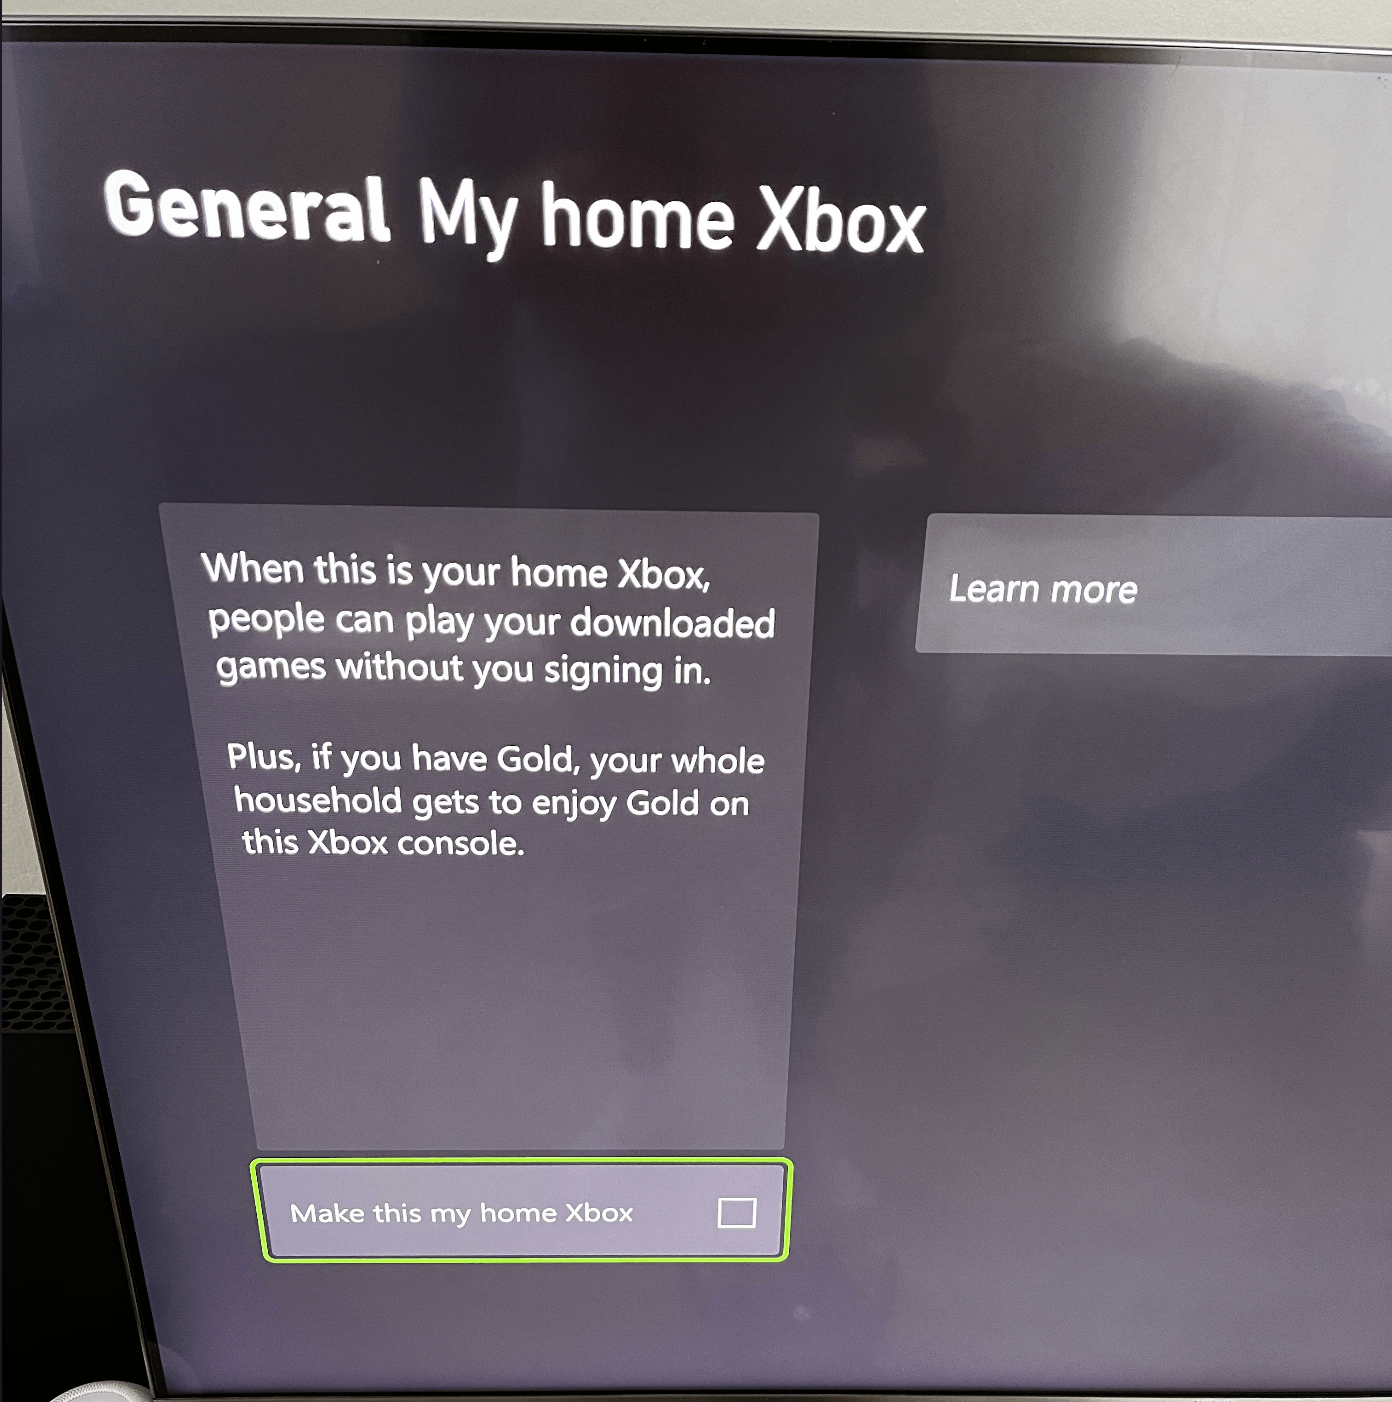 How To Make Home Xbox Unable to set new Xbox Series X as Home Xbox - Microsoft Community